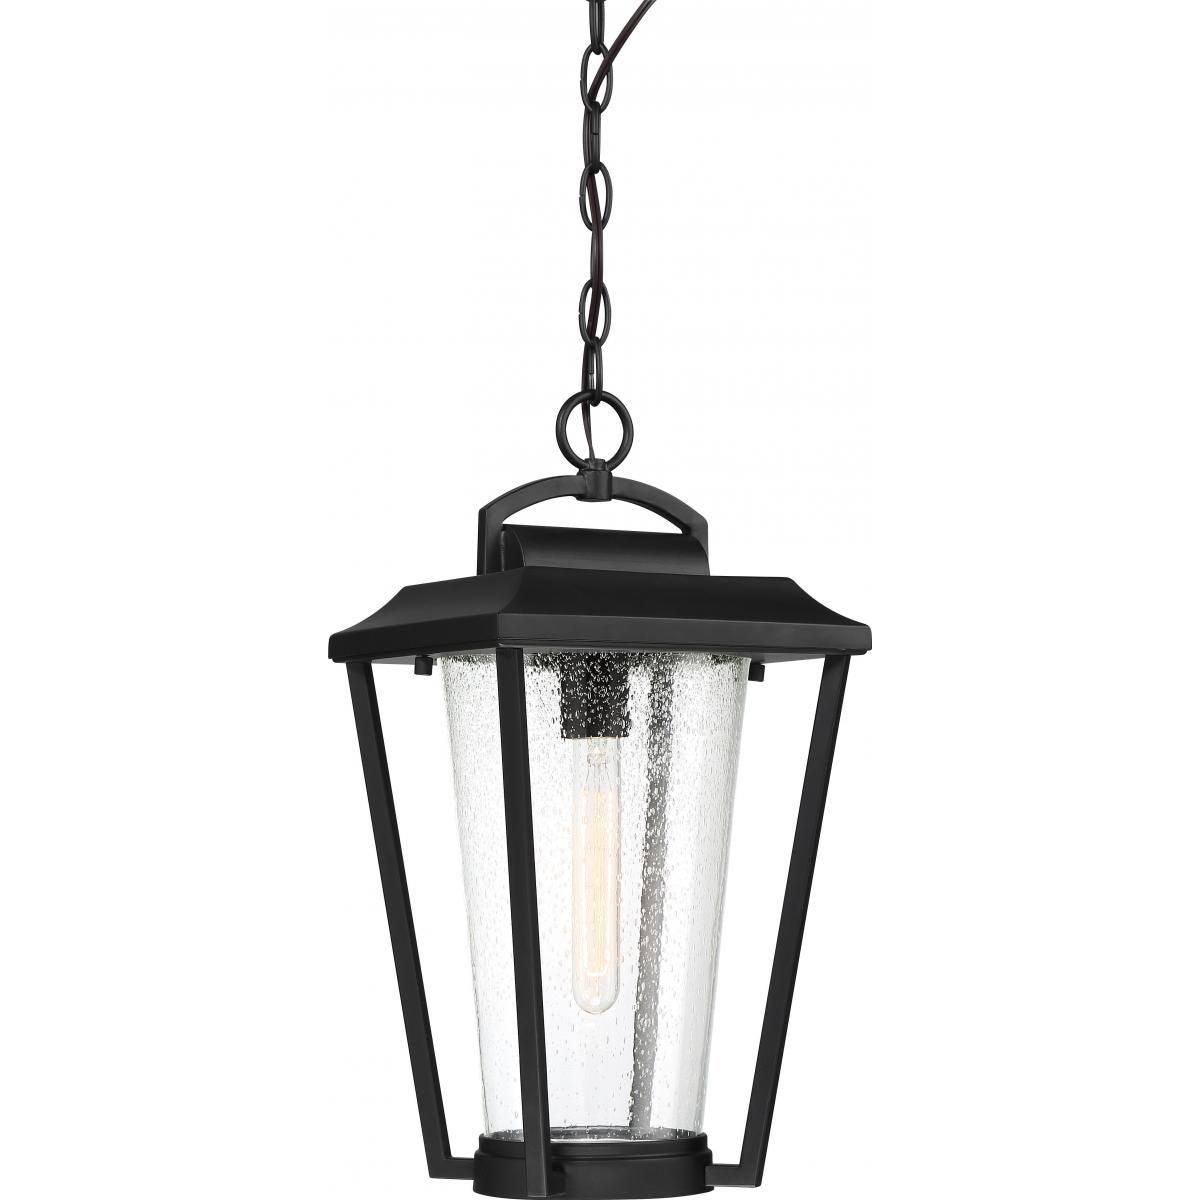 Lakeview 16 In. Outdoor Hanging Lantern Bronze finish